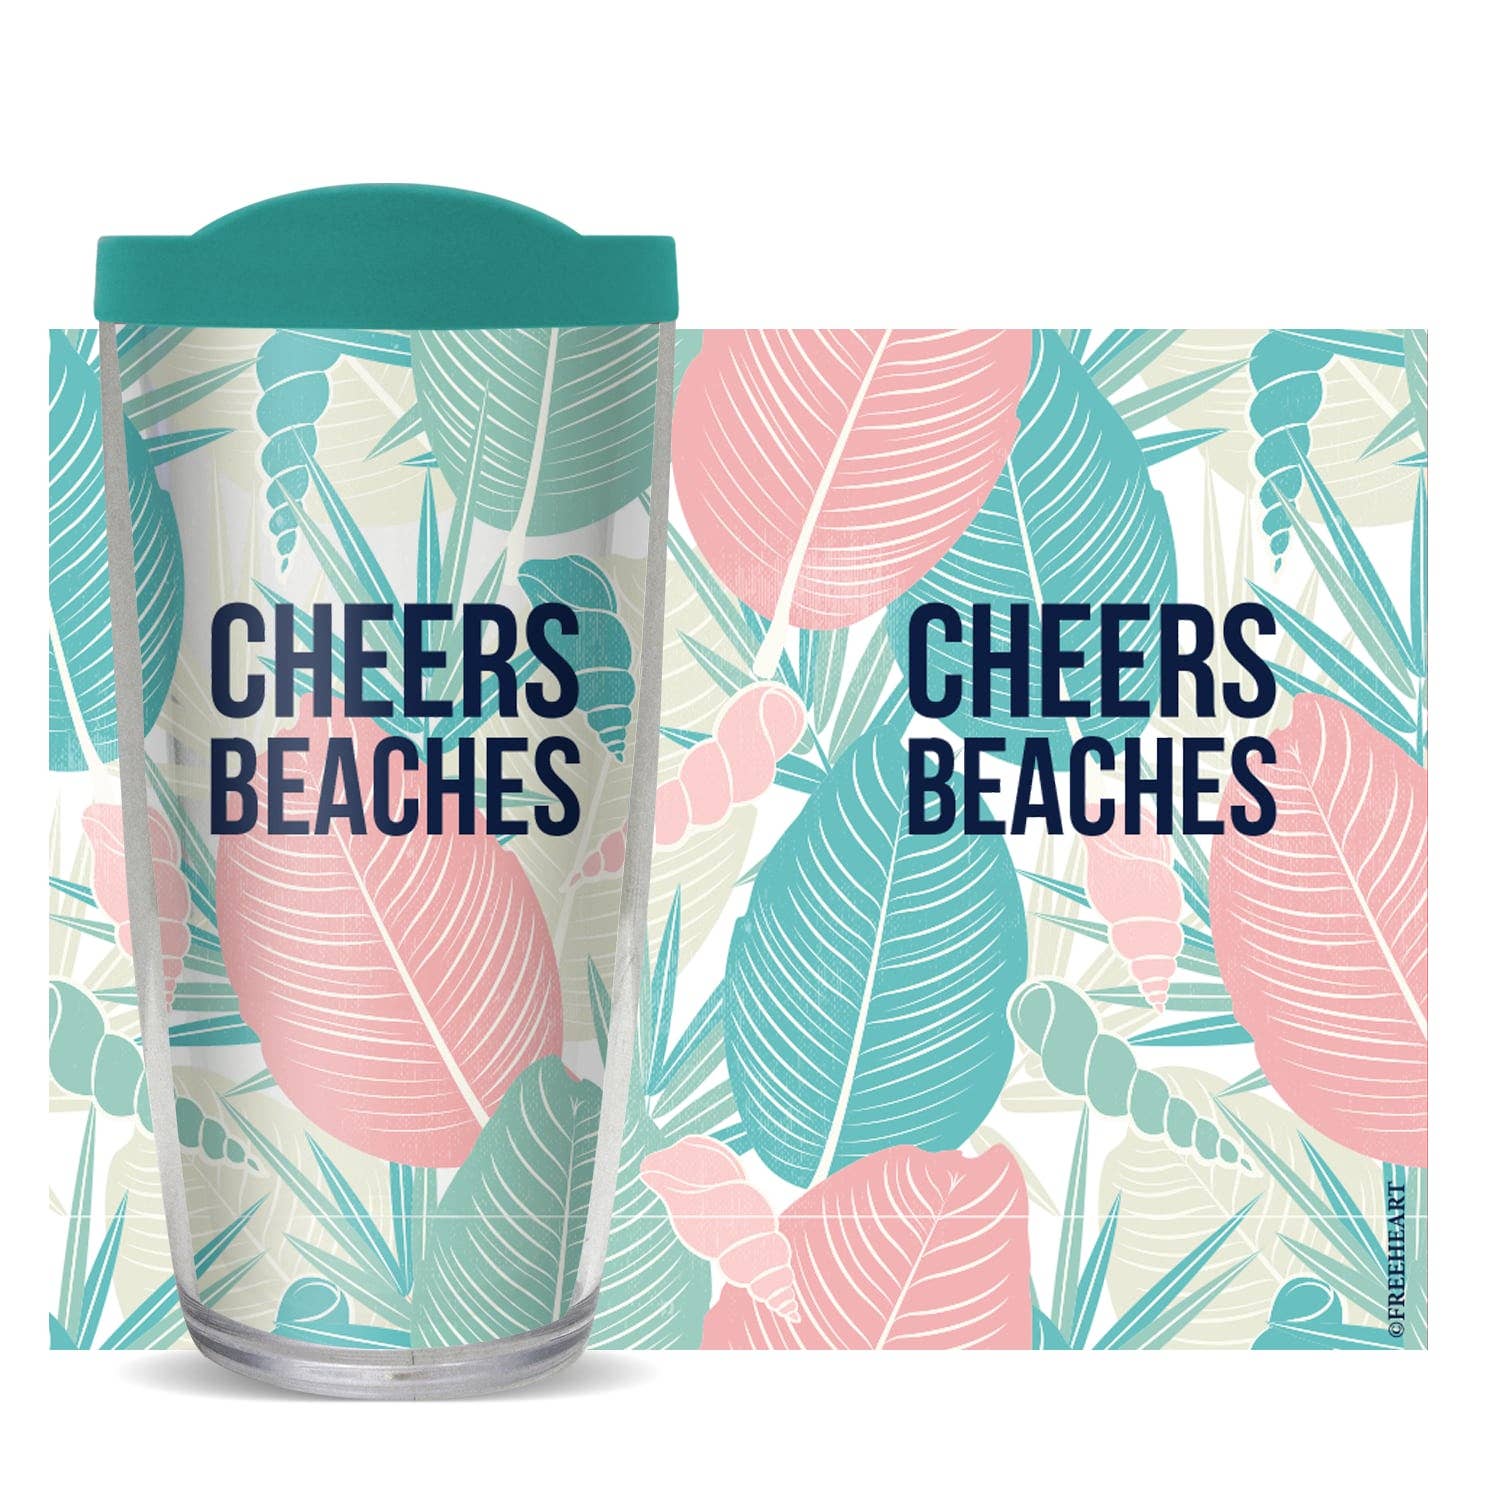 Cheers Beaches on Pastel Leaves and Shells Tumbler